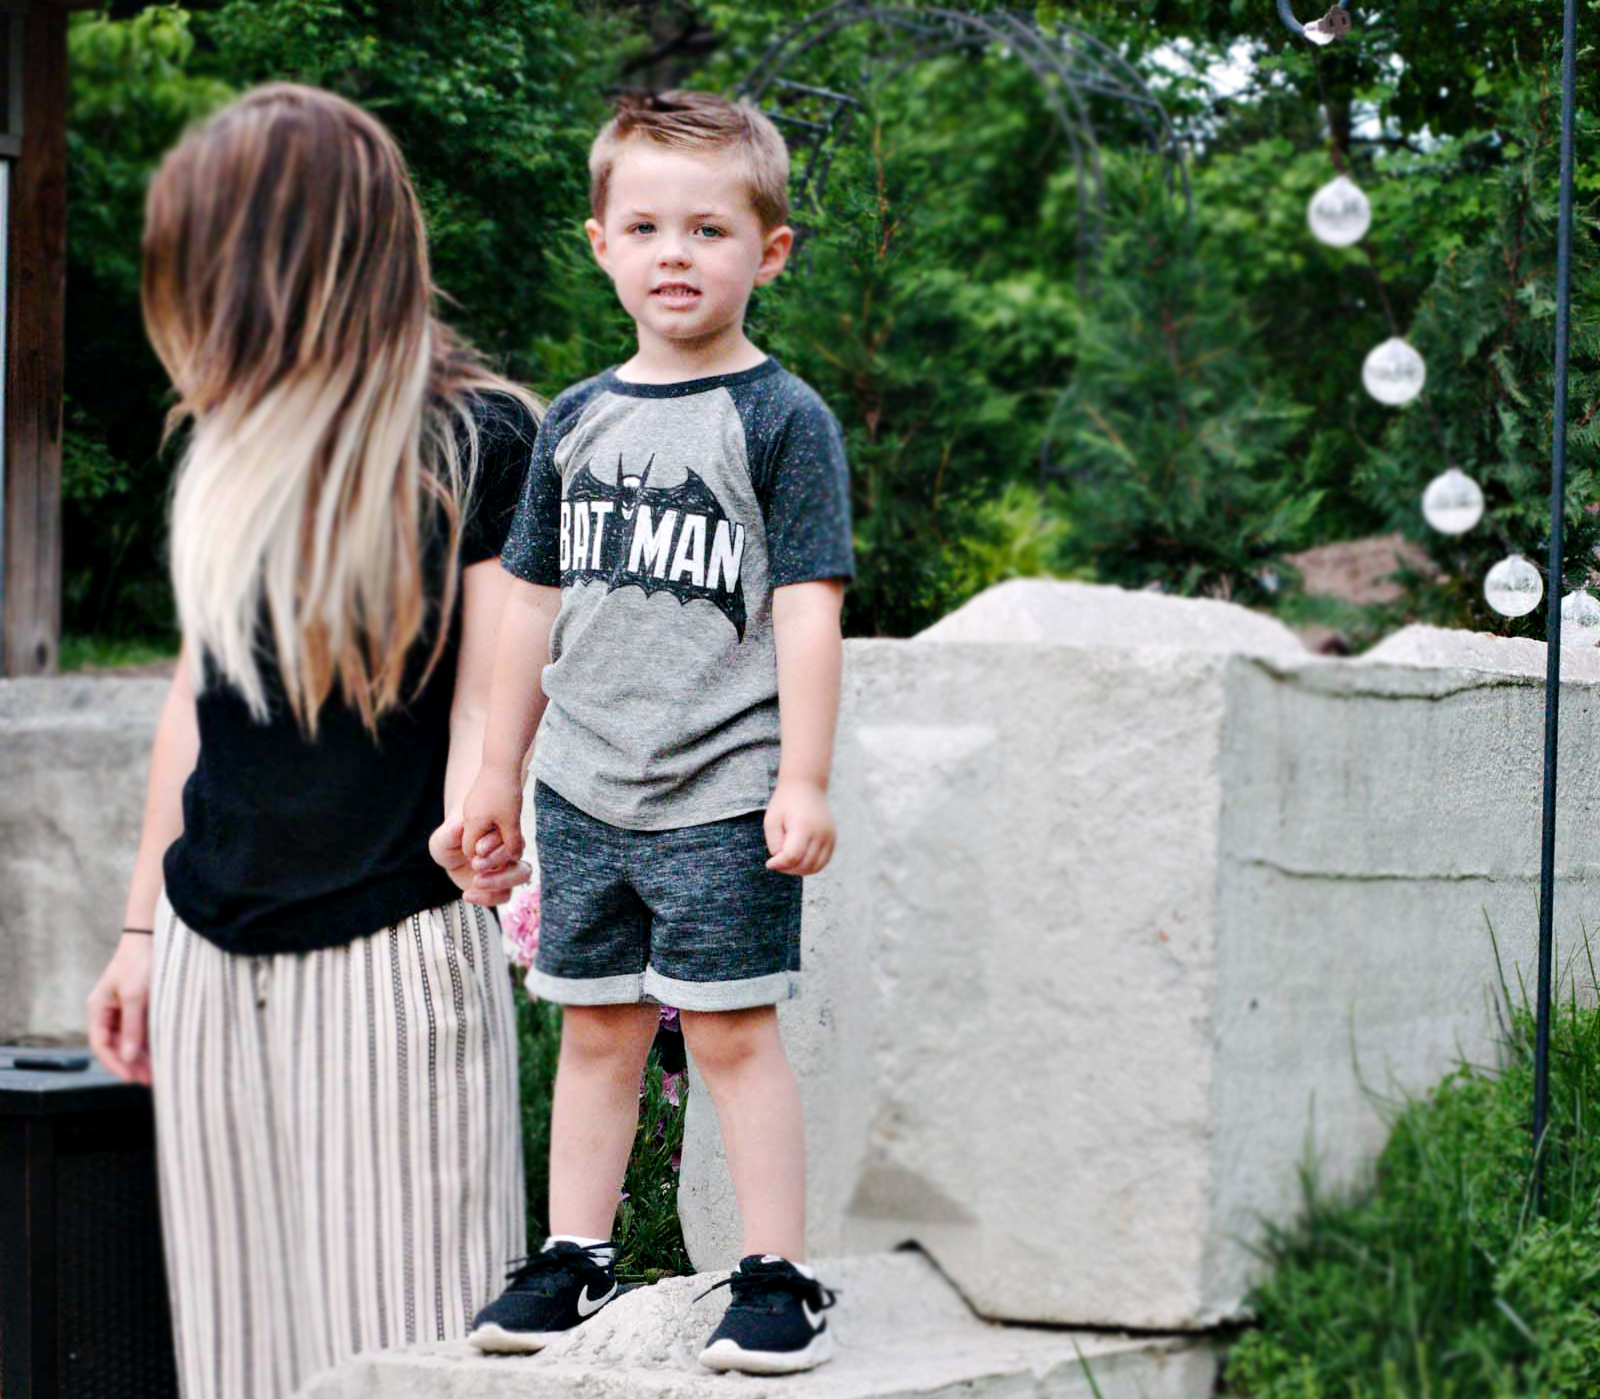 Kids Clothing and Kid's Outfit Ideas for Spring - Best Kids Fashion via lifestyle blogger Misty Nelson @frostedevents 